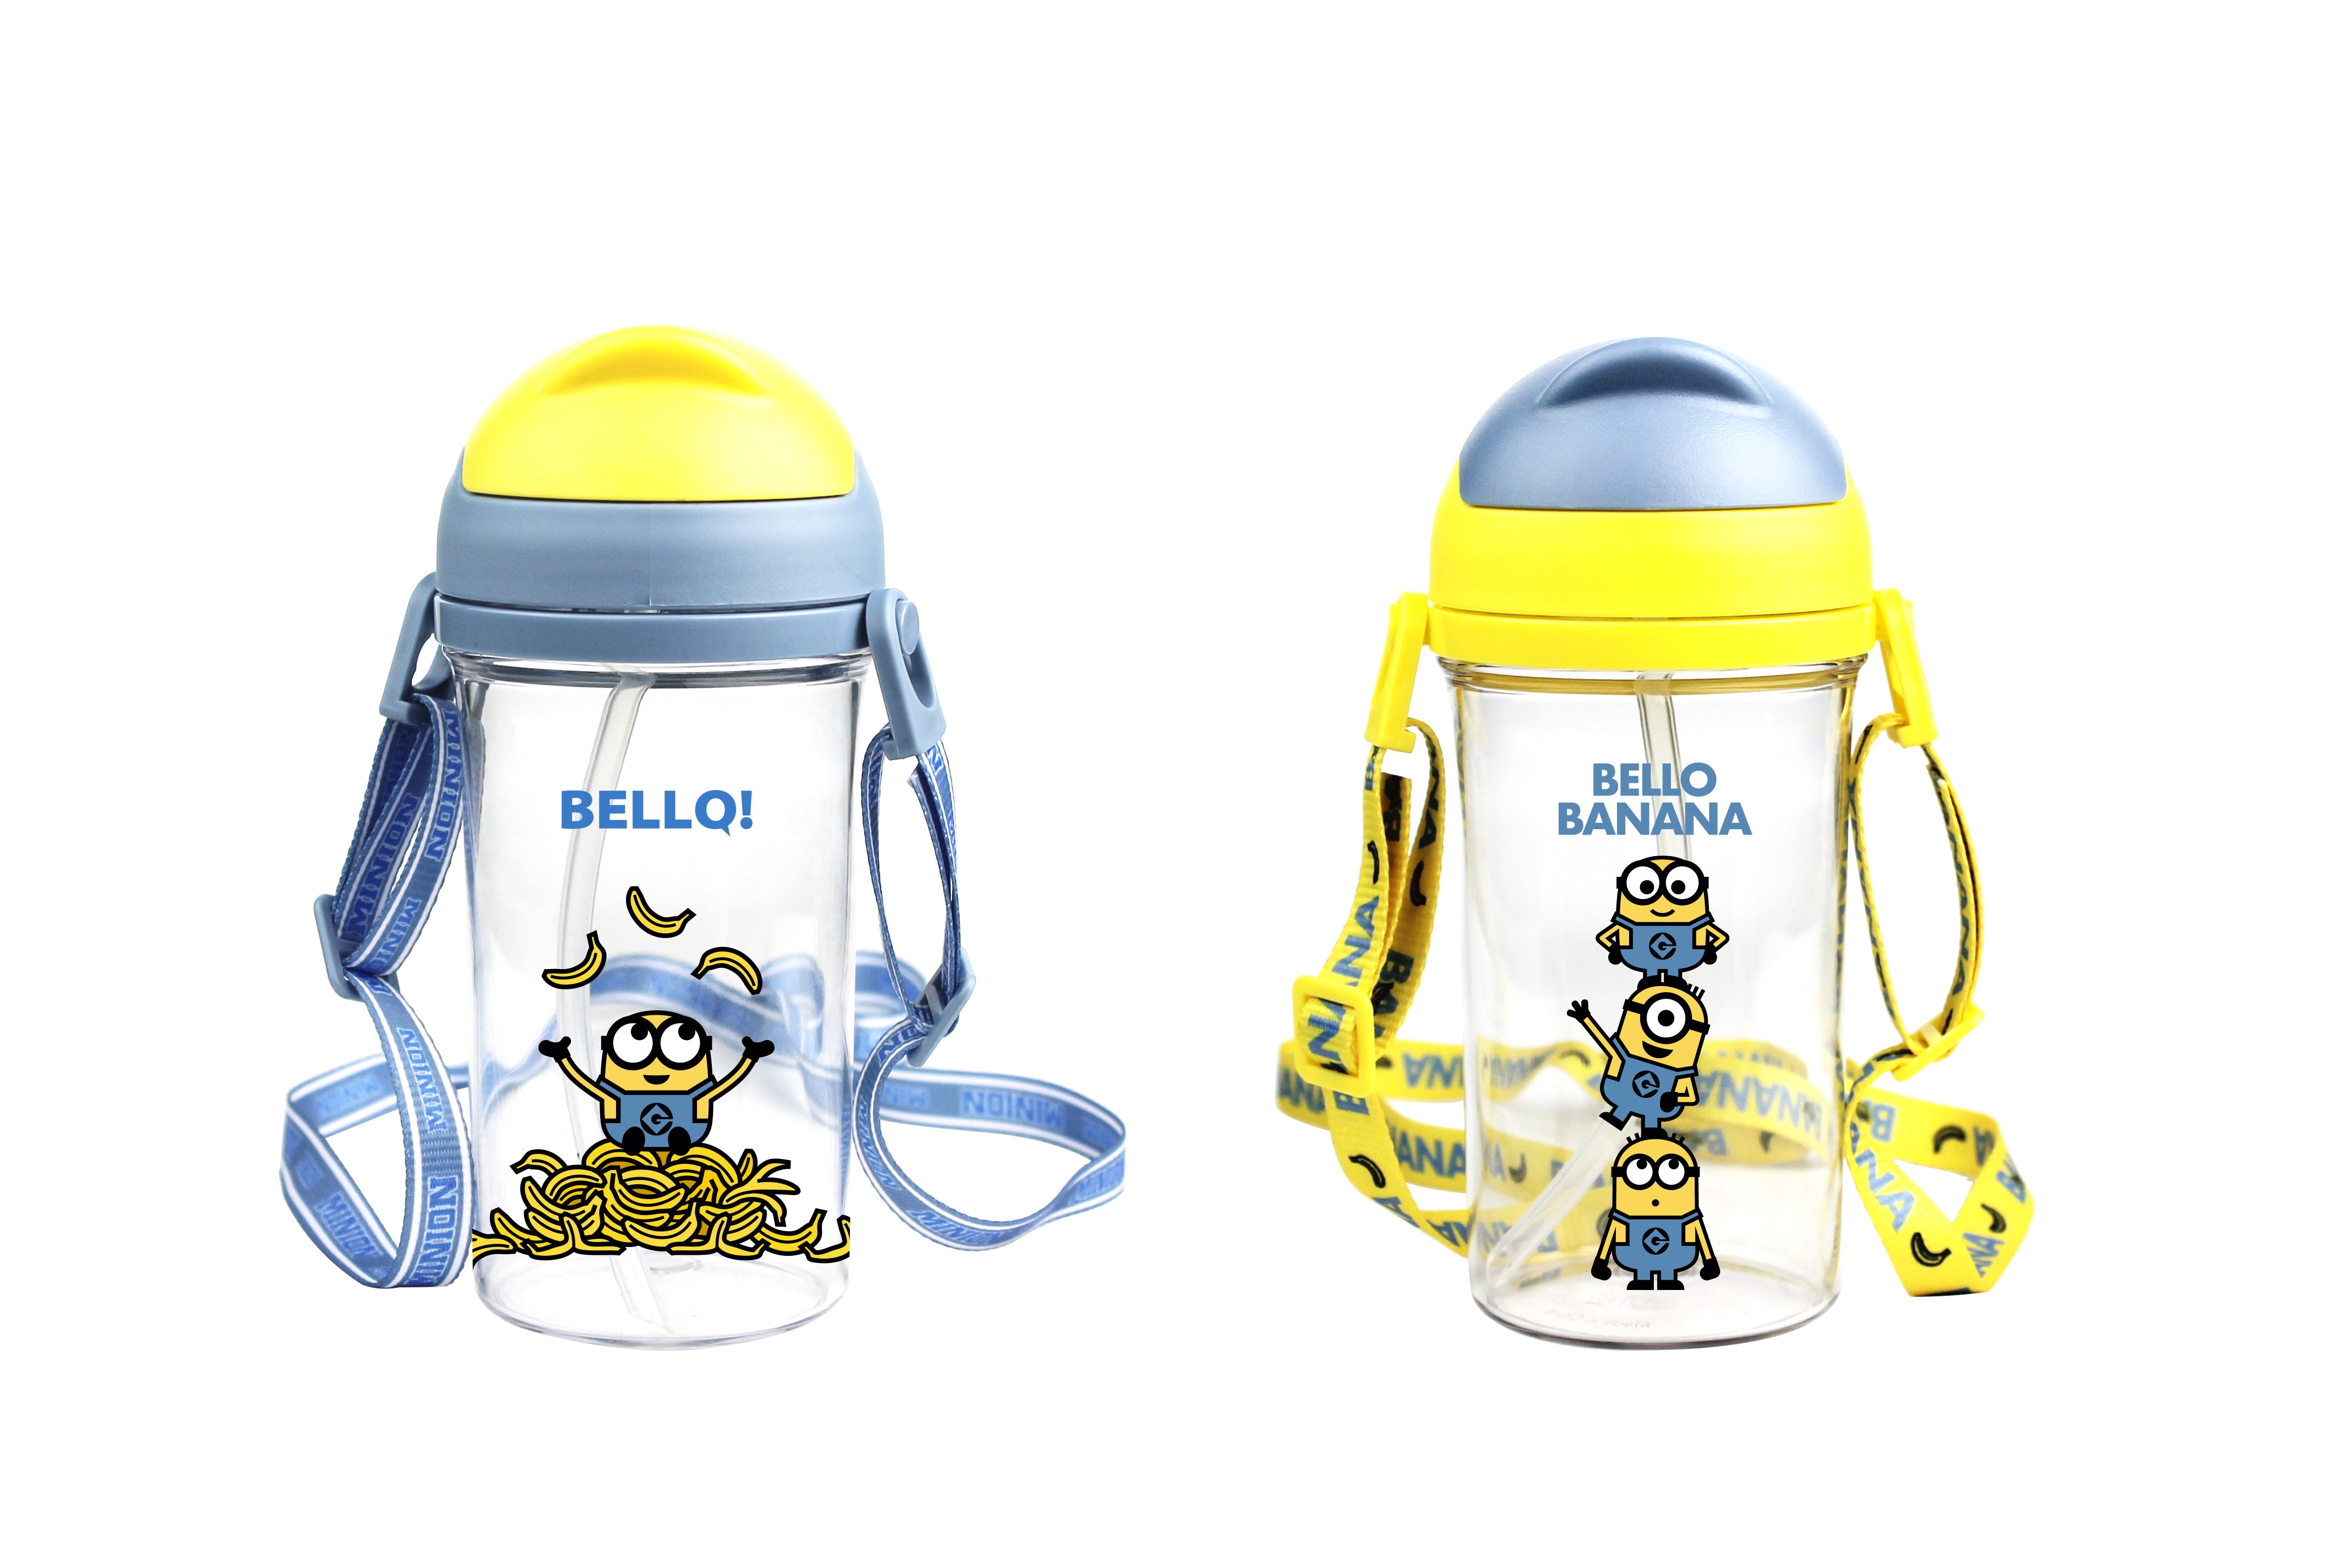 MINISO Minions Collection Plastic Water Bottle with Straw and Shoulder  Strap - 600mL Yellow Tumbler